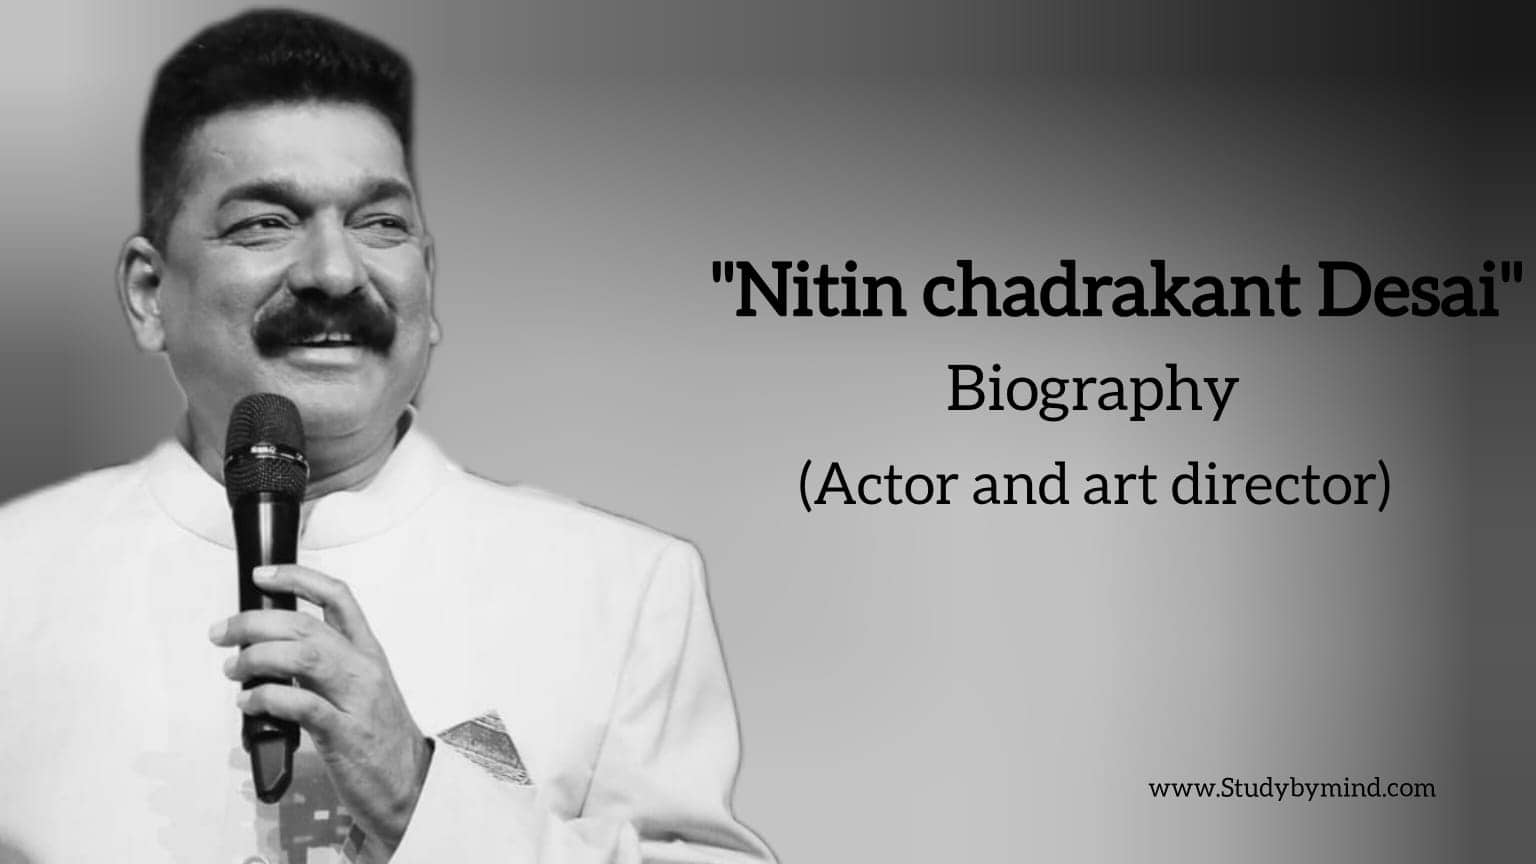 You are currently viewing Nitin Chandrakant Desai biography in english (Art director and actor)